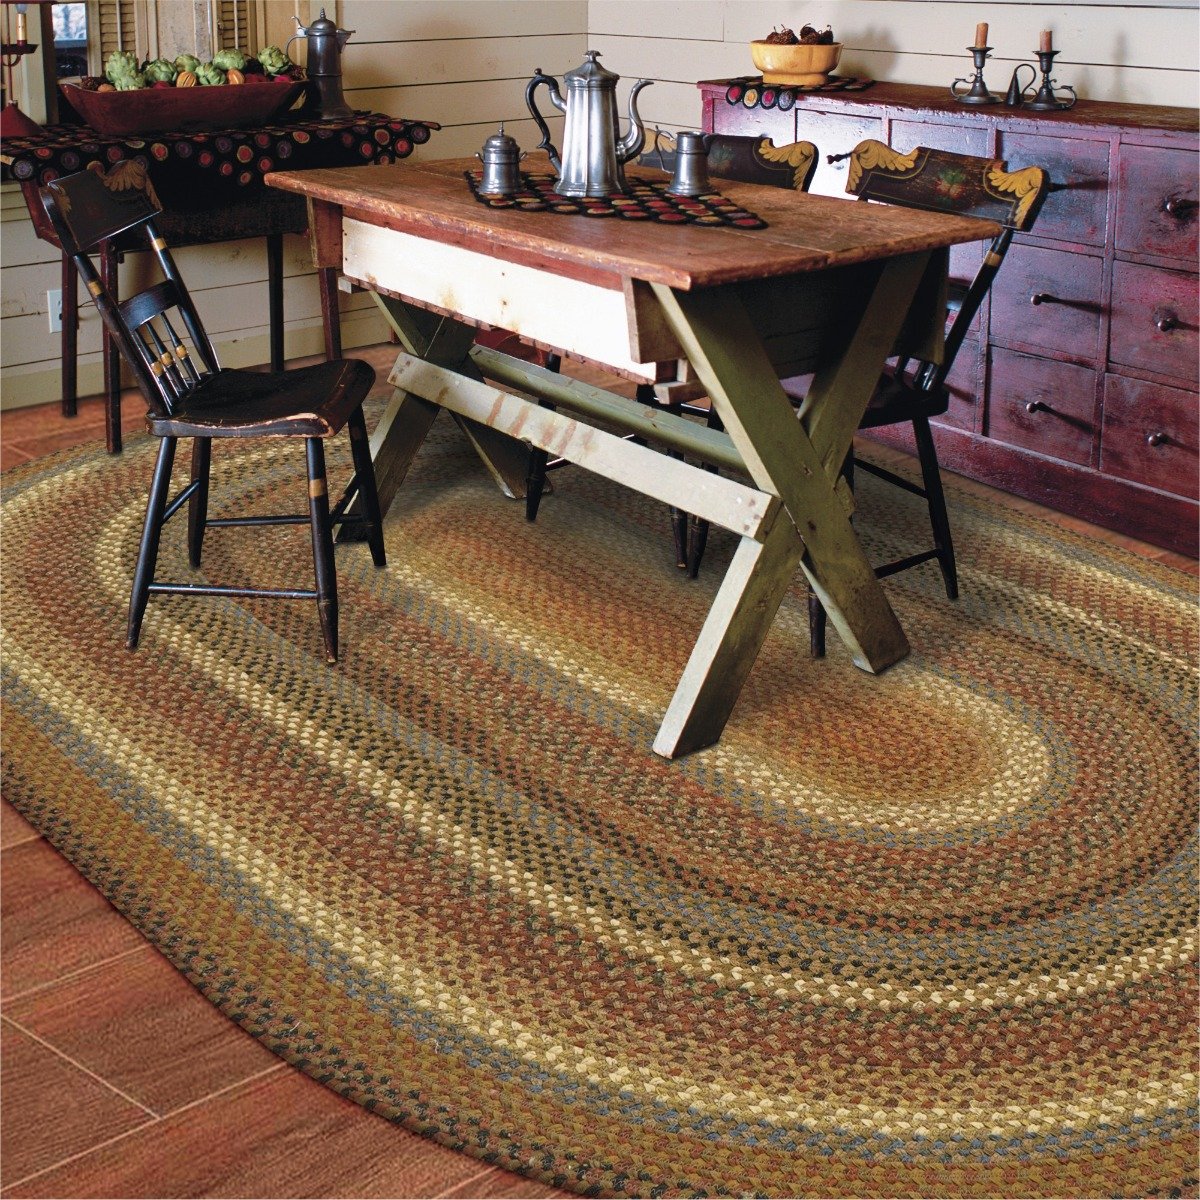 Peppercorn Cotton Braided Rugs by Homespice Decor